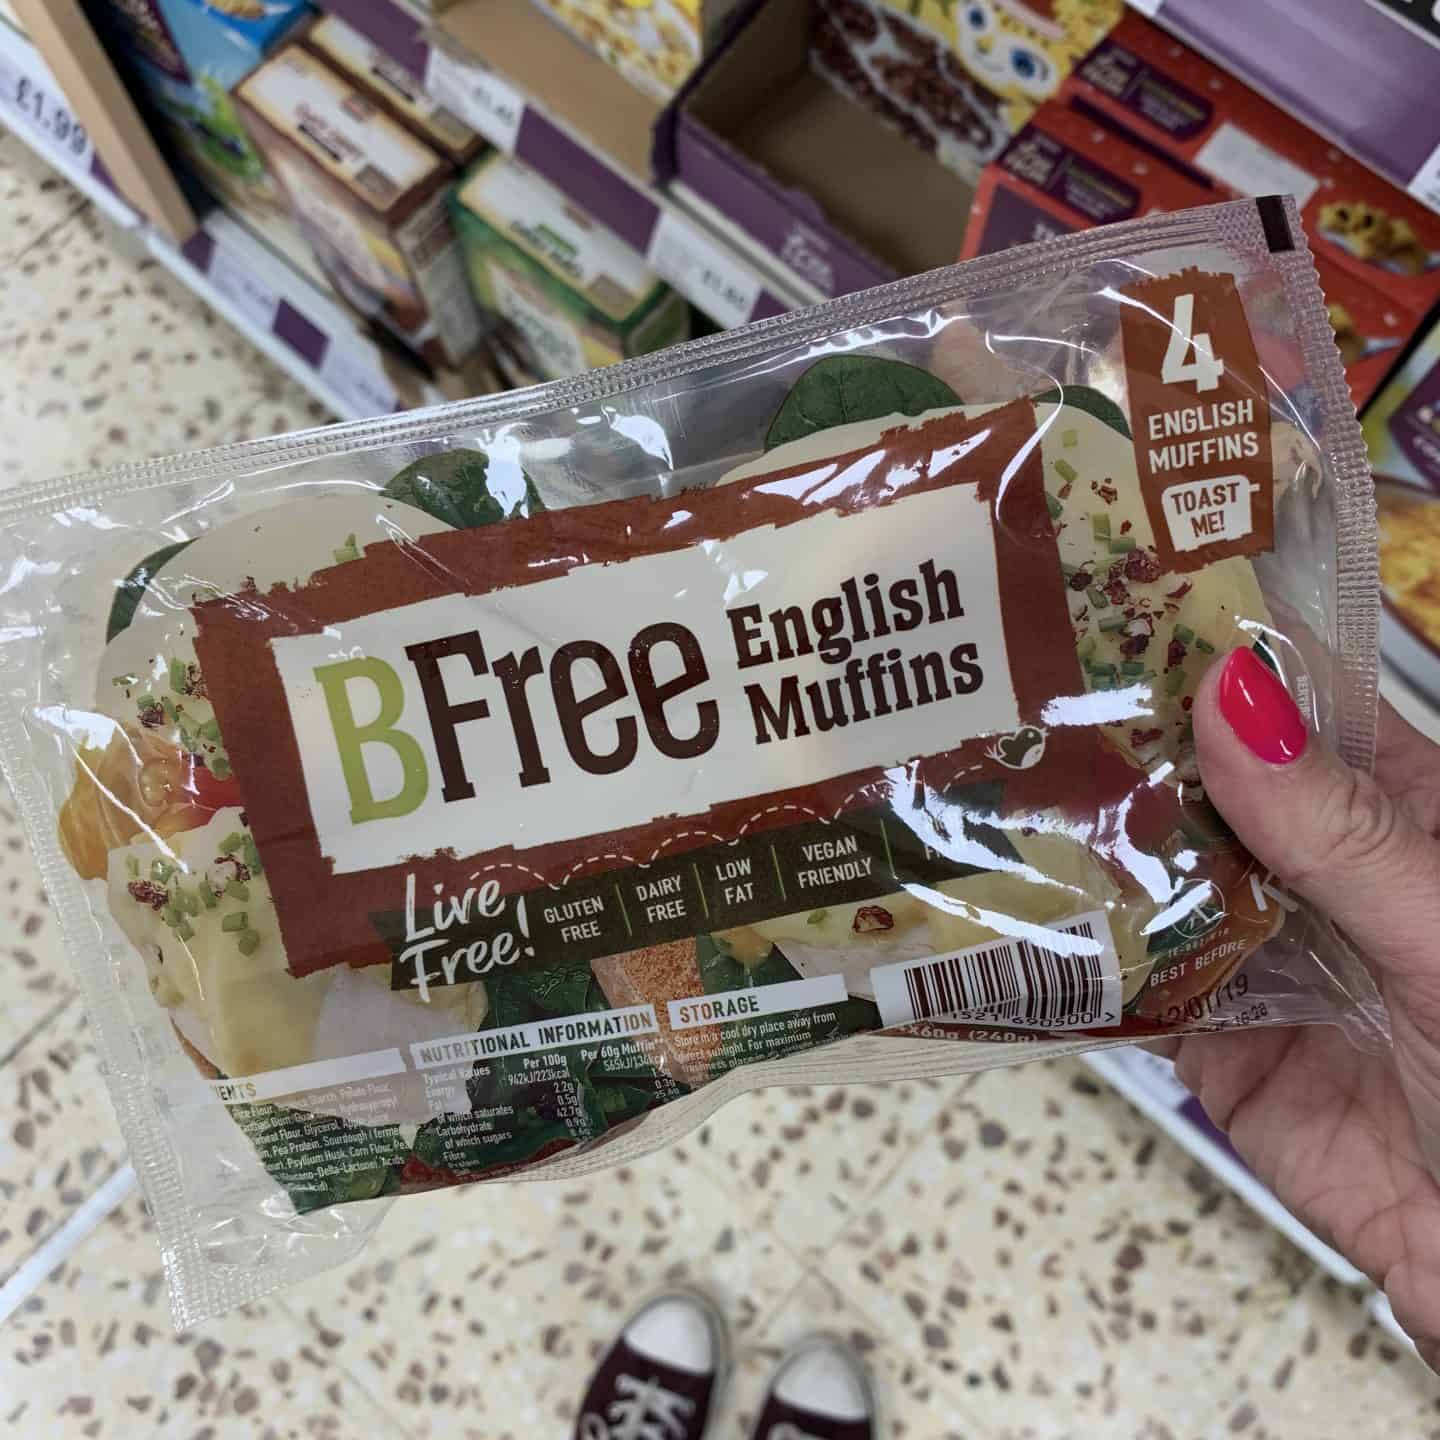 GLUTEN FREE FINDS MAY 2019 (12)